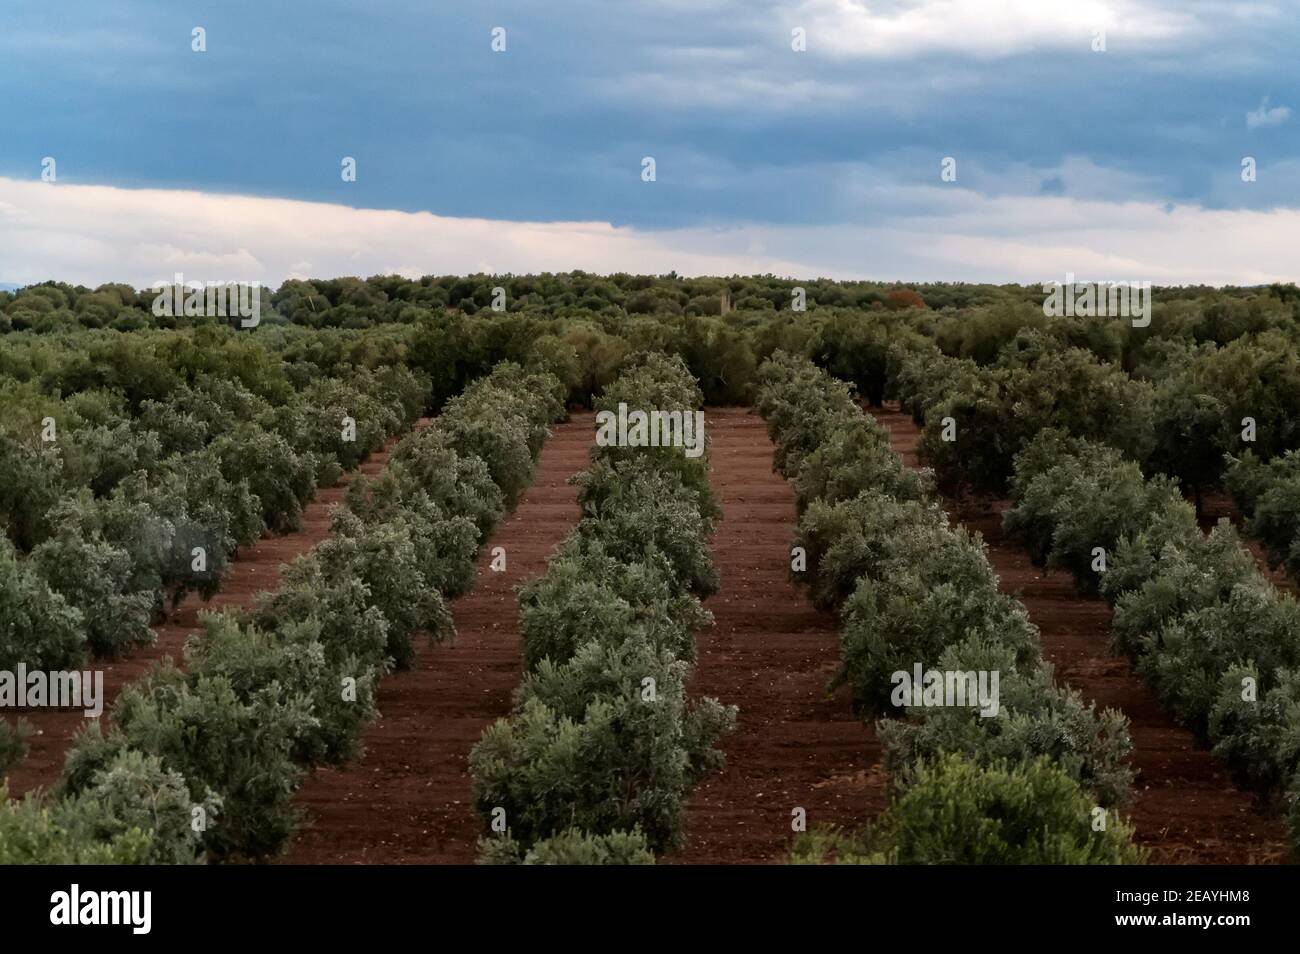 Olive trees in a row. Plantation and cloudy sky. Selective focus Stock Photo